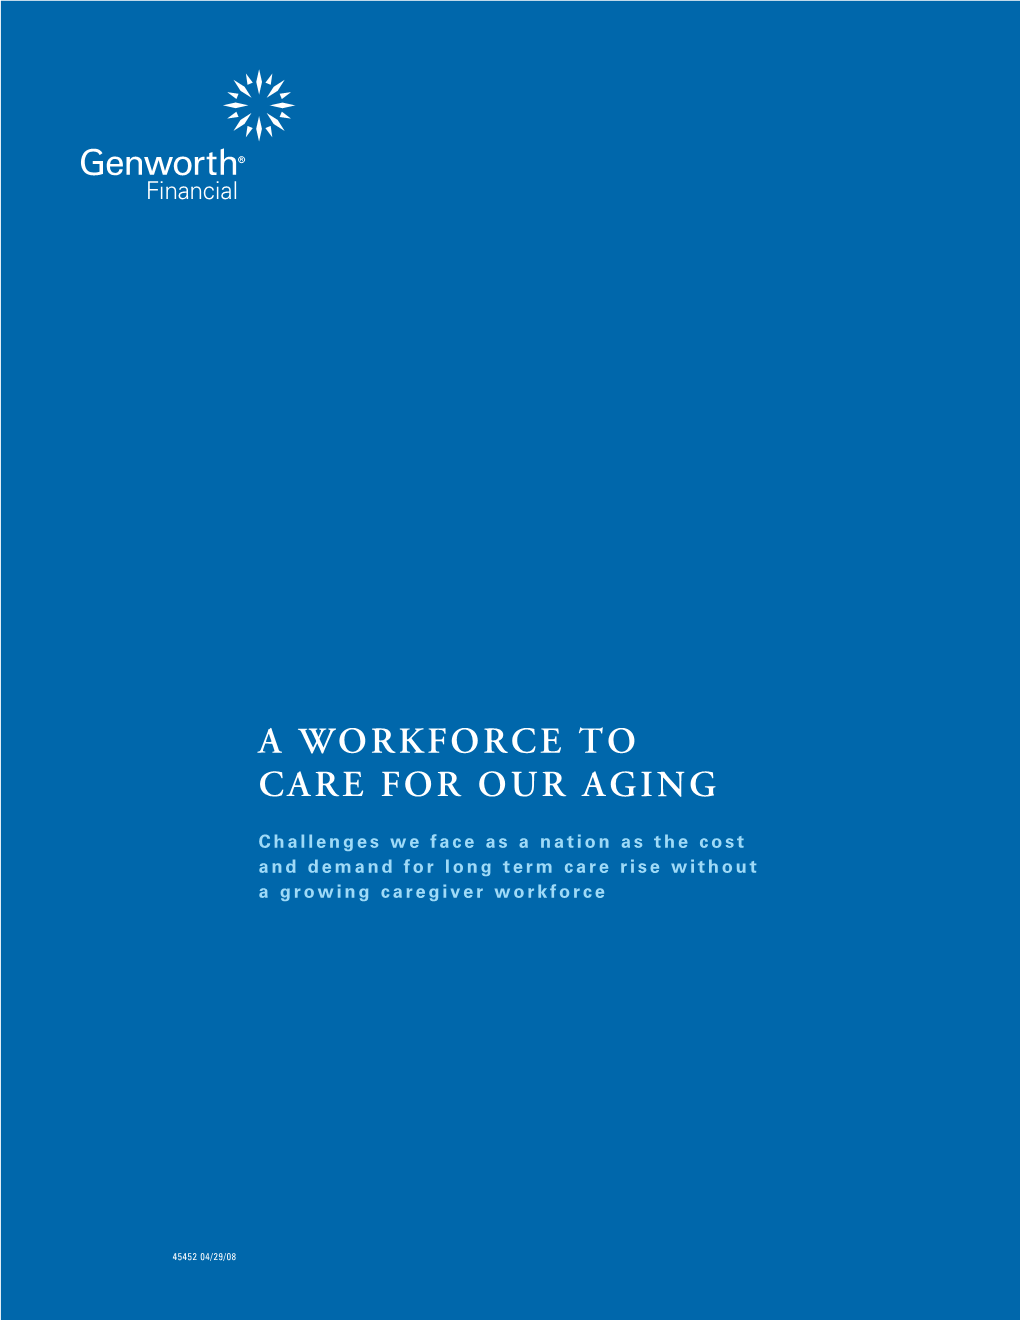 A Workforce to Care for Our Aging